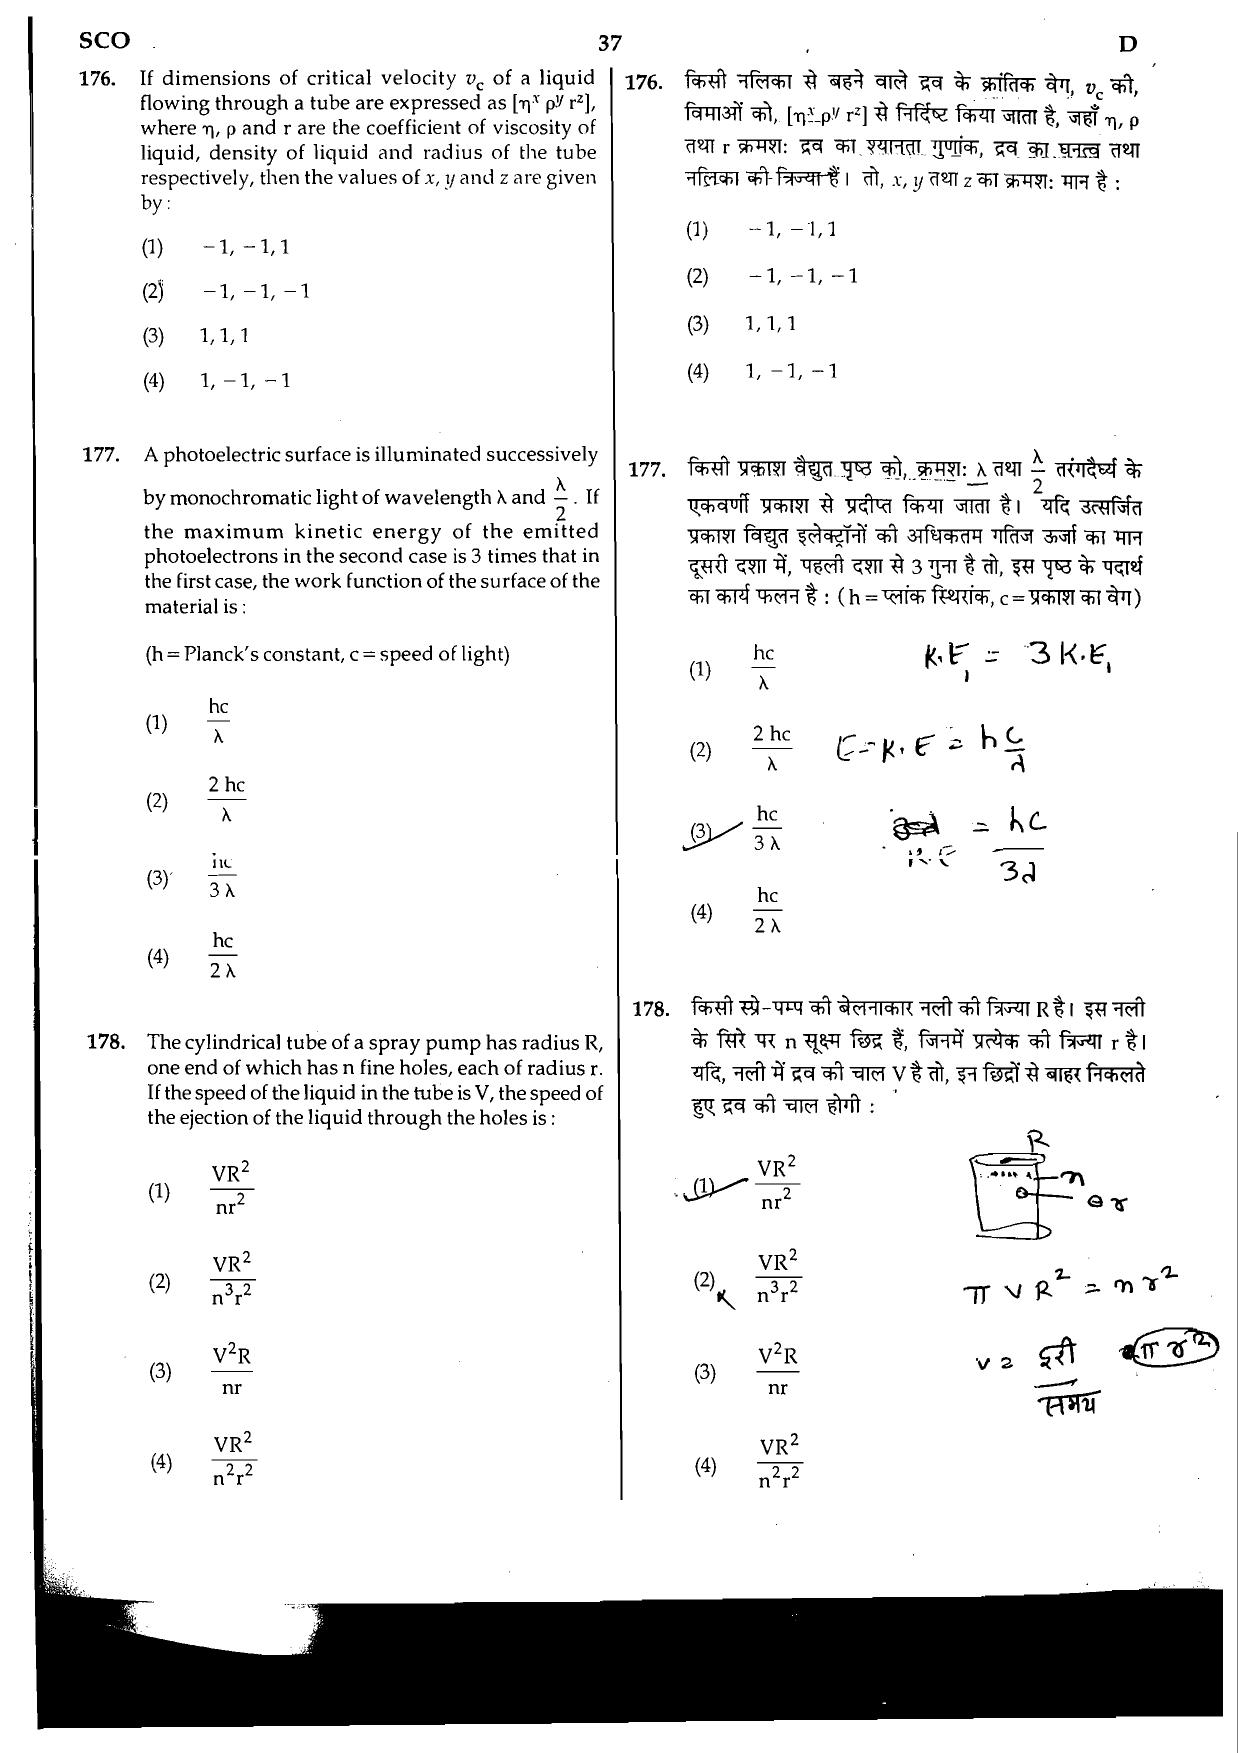 NEET Code D 2015 Question Paper - Page 37